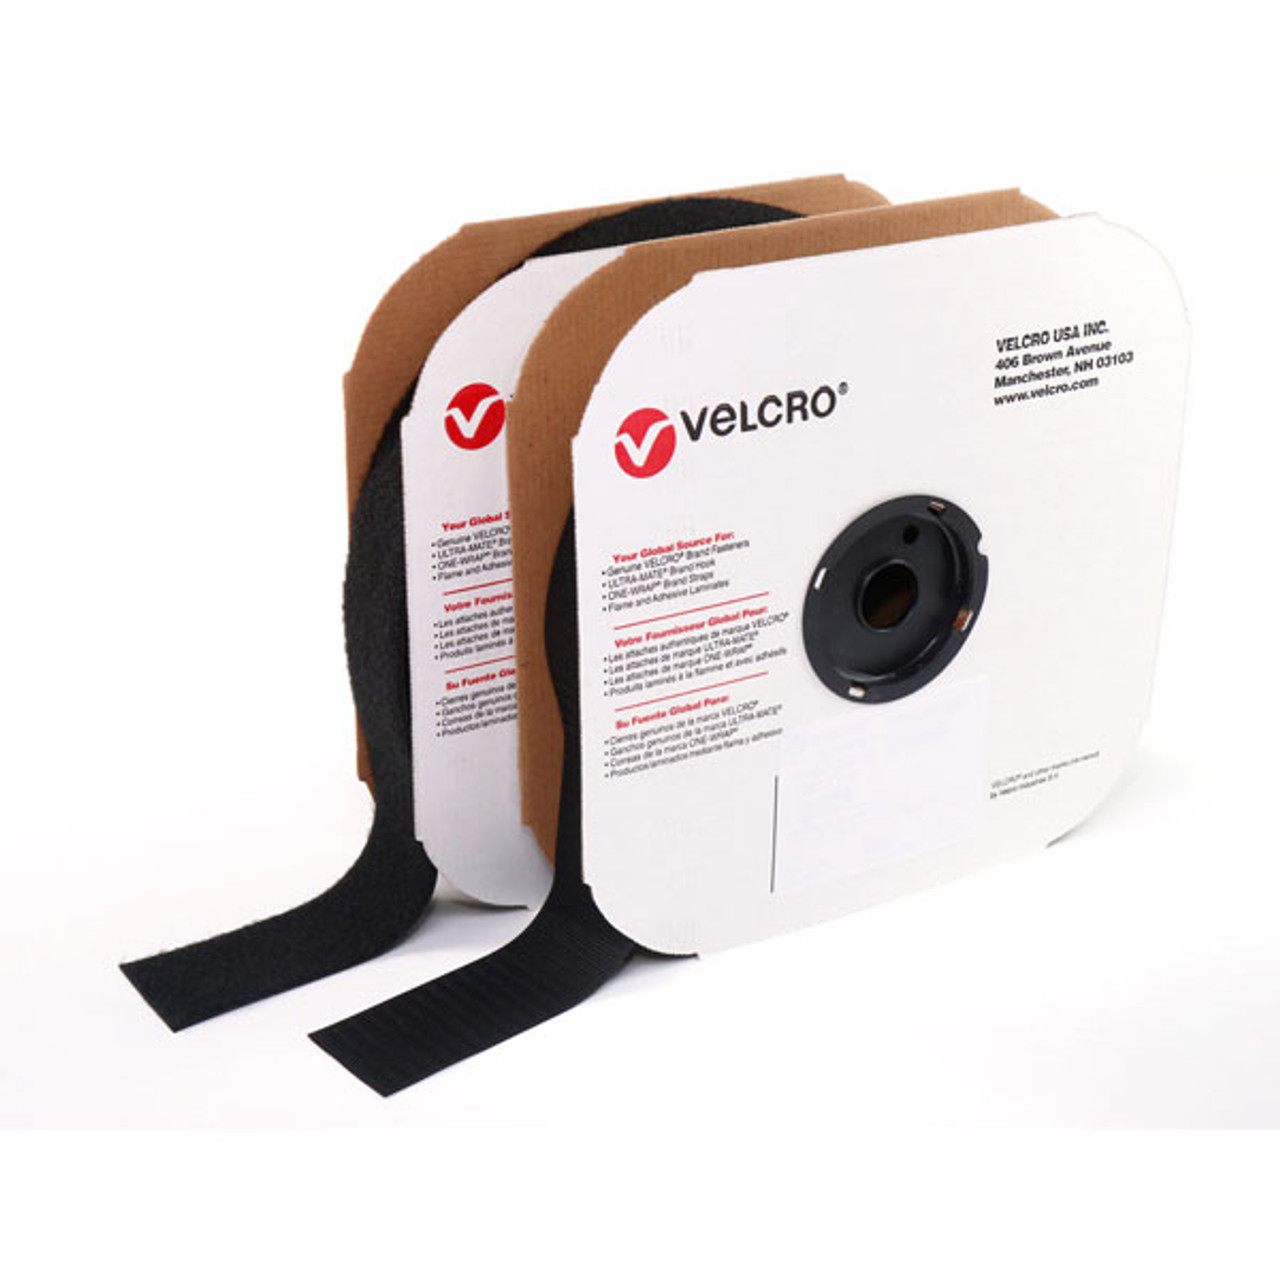 VELCRO® Brand Sew-On Tape 4 sold by INDUSTRIAL WEBBING CORP